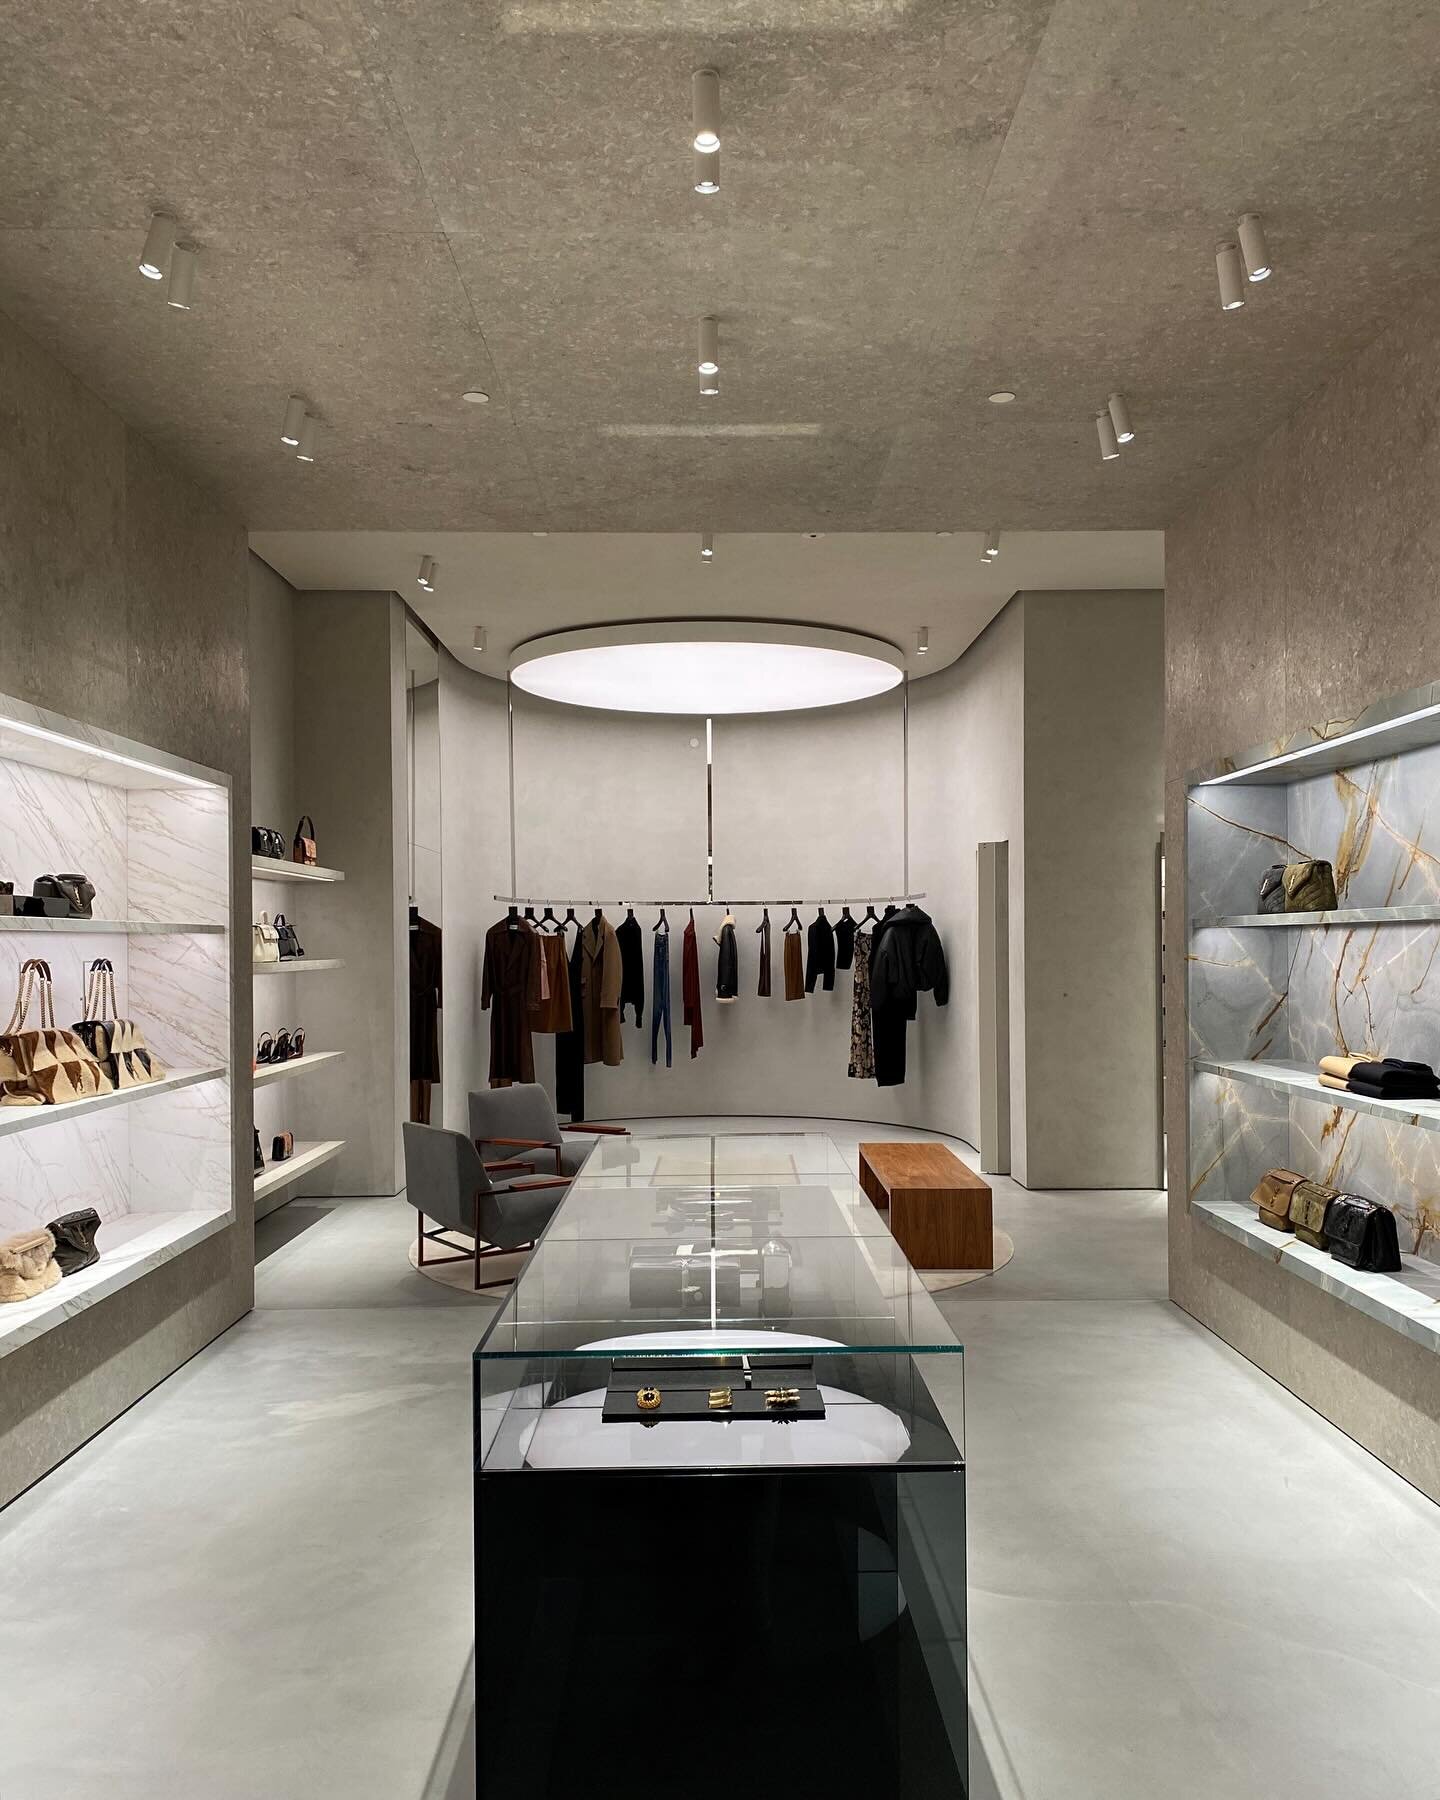 Saint Laurent&rsquo;s new concept which features beige and gray marble, stucco walls, luminous ceiling panels, focused lighting, ribbed &ldquo;corduroy&rdquo; concrete panels and concrete flooring.

Client: Saint Laurent
Location: Somerset, Collectio